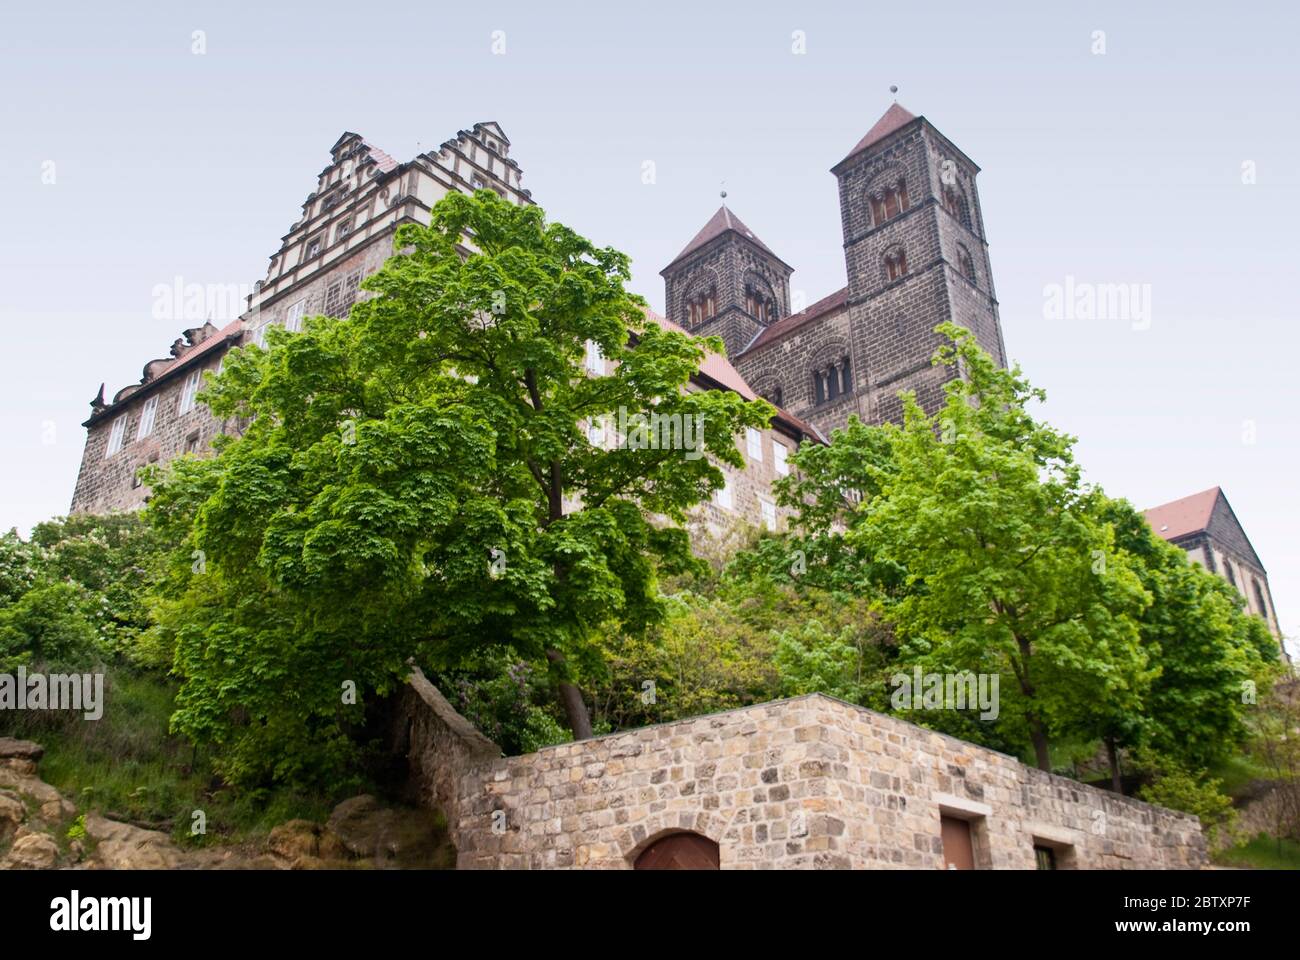 In the historic old town of Quedlinburg, Germany Stock Photo